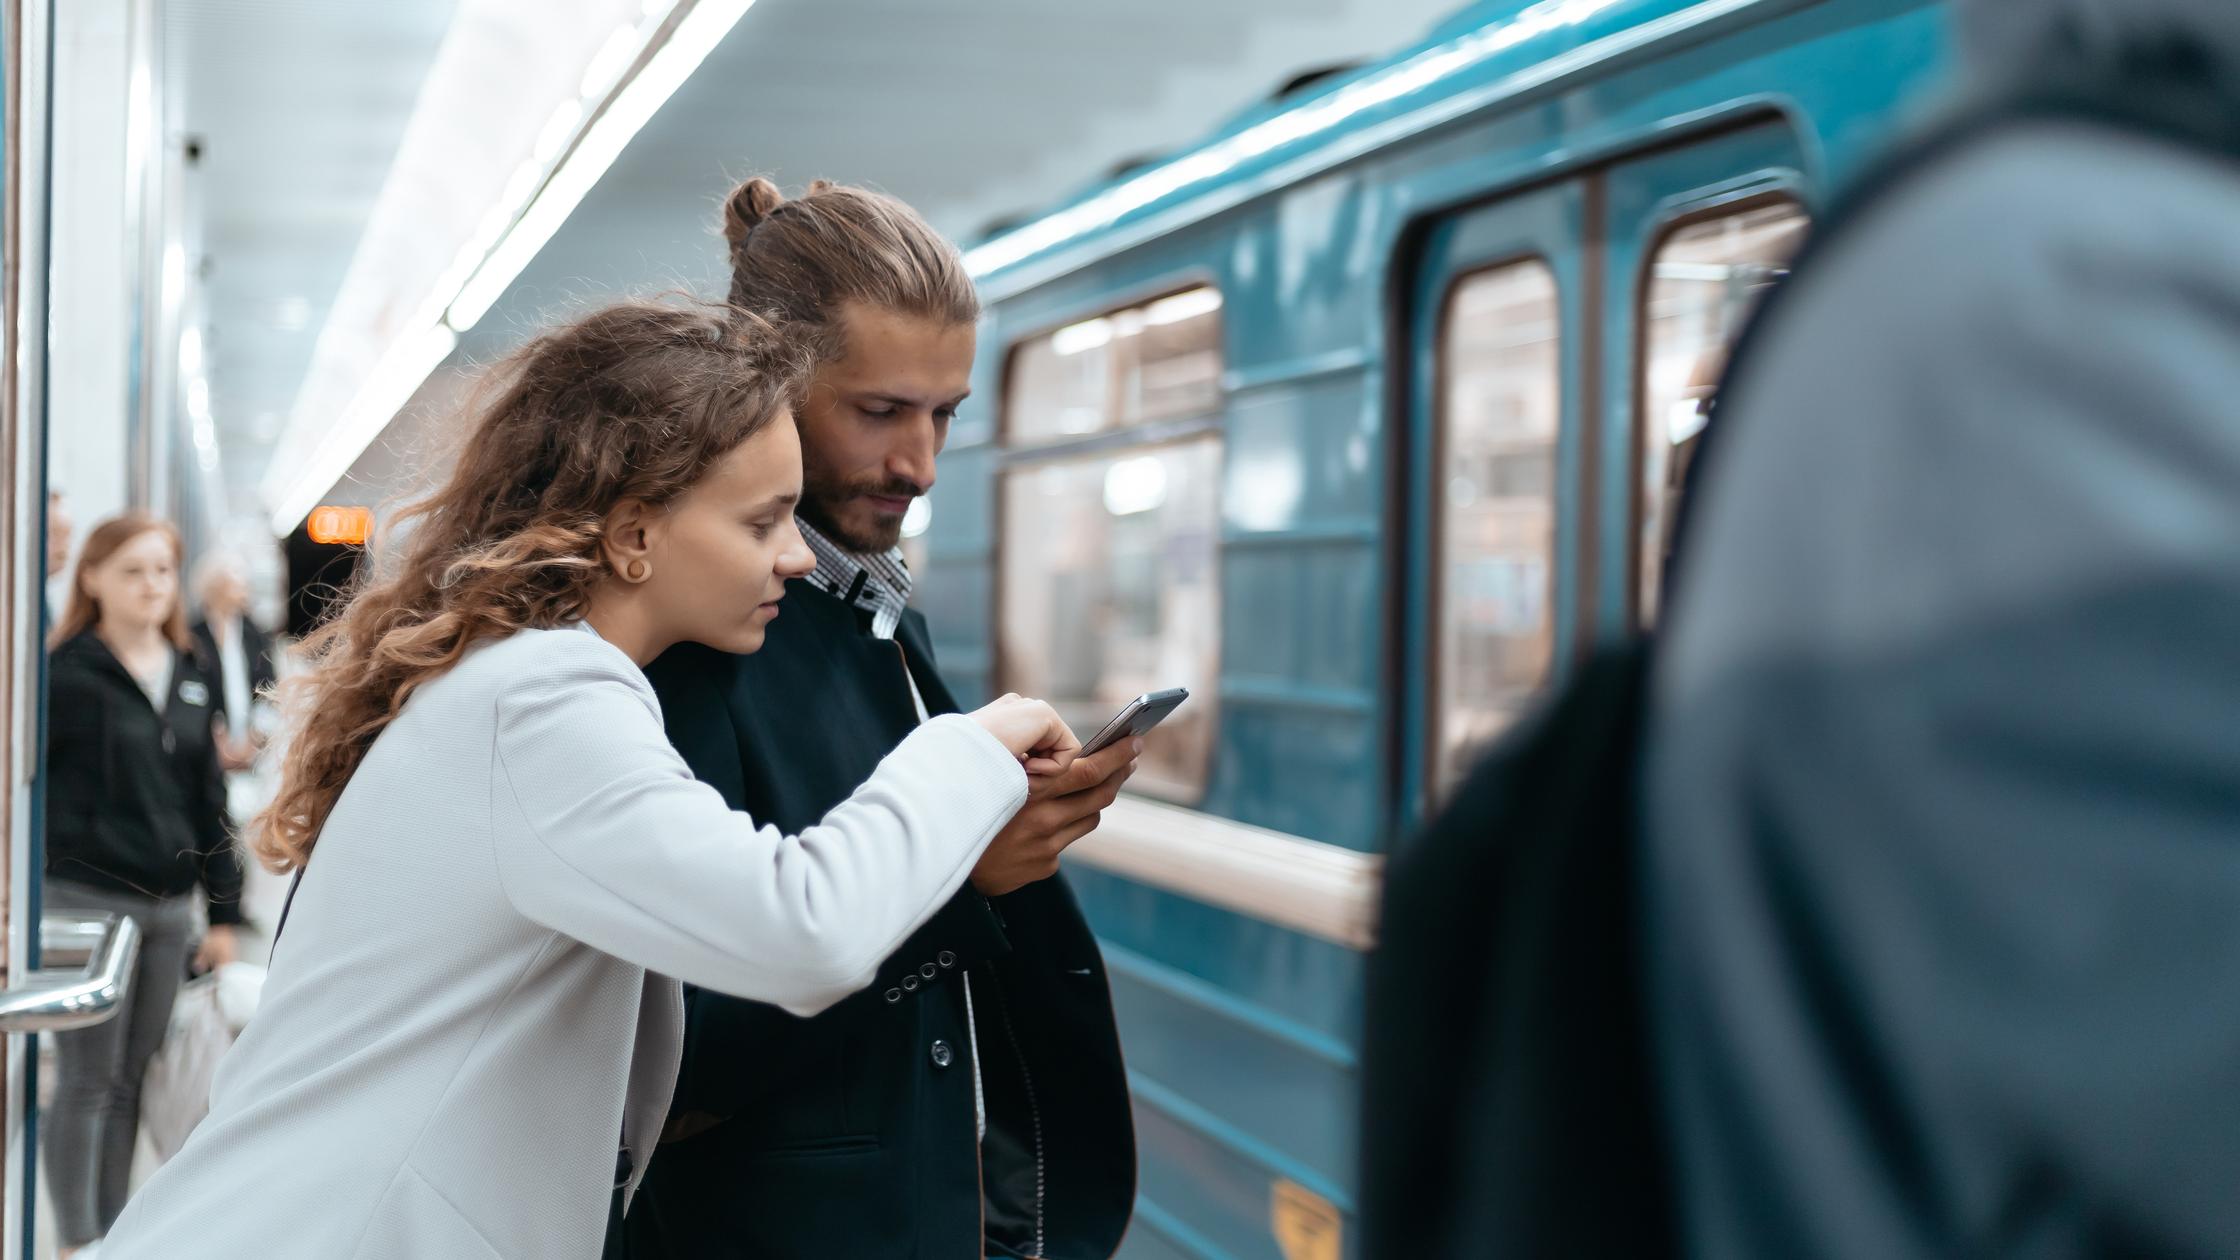 Digital Trust in the Built Environment - Young couple with a smartphone on the subway platform